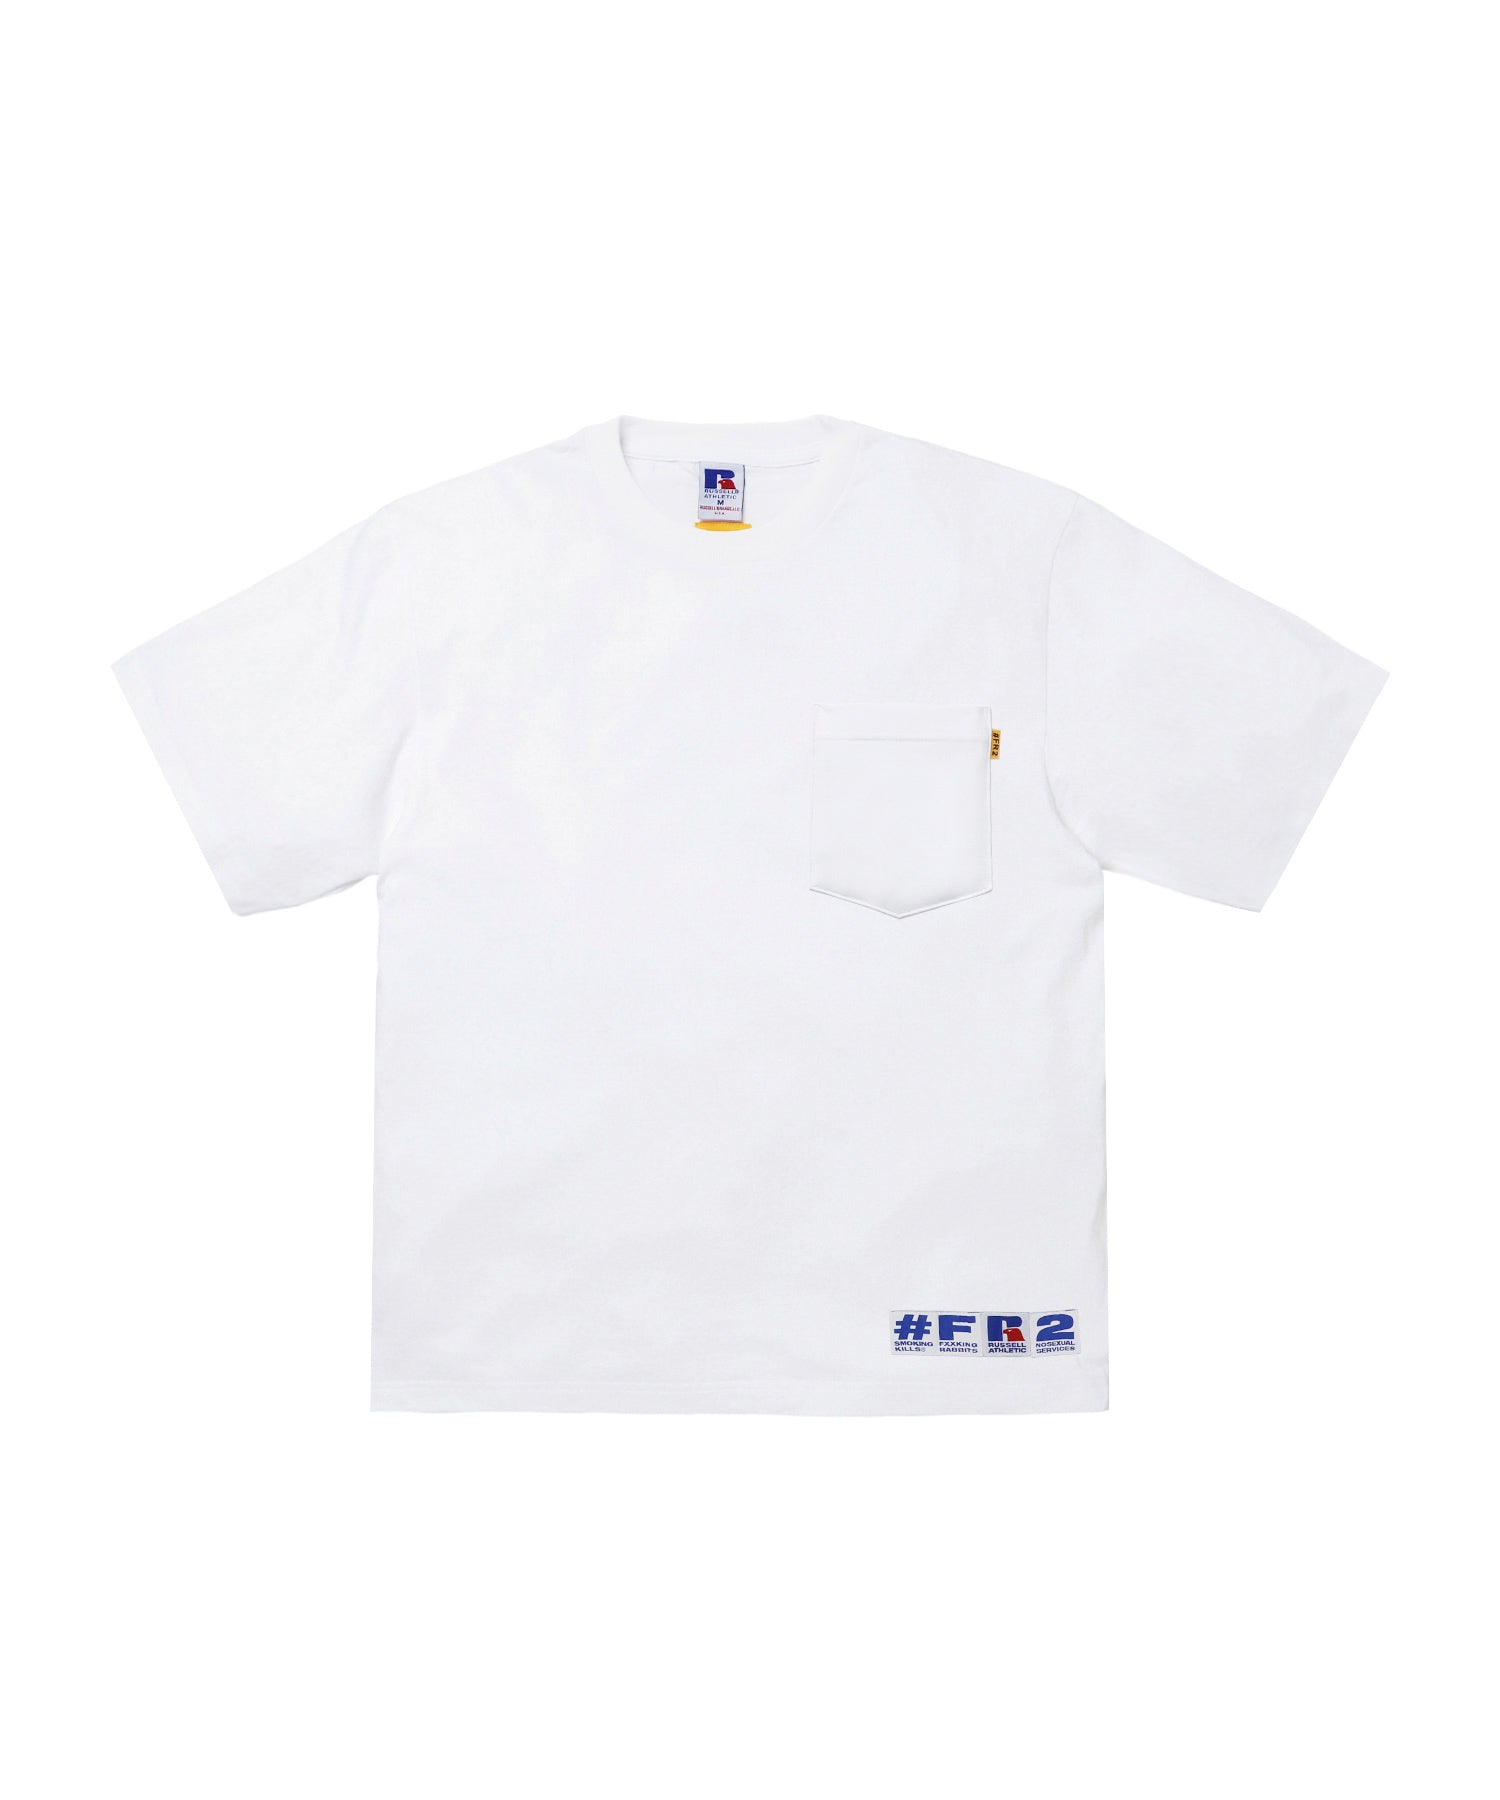 Russell collaboration with ♯FR2 Pocket T-shirt – #FR2